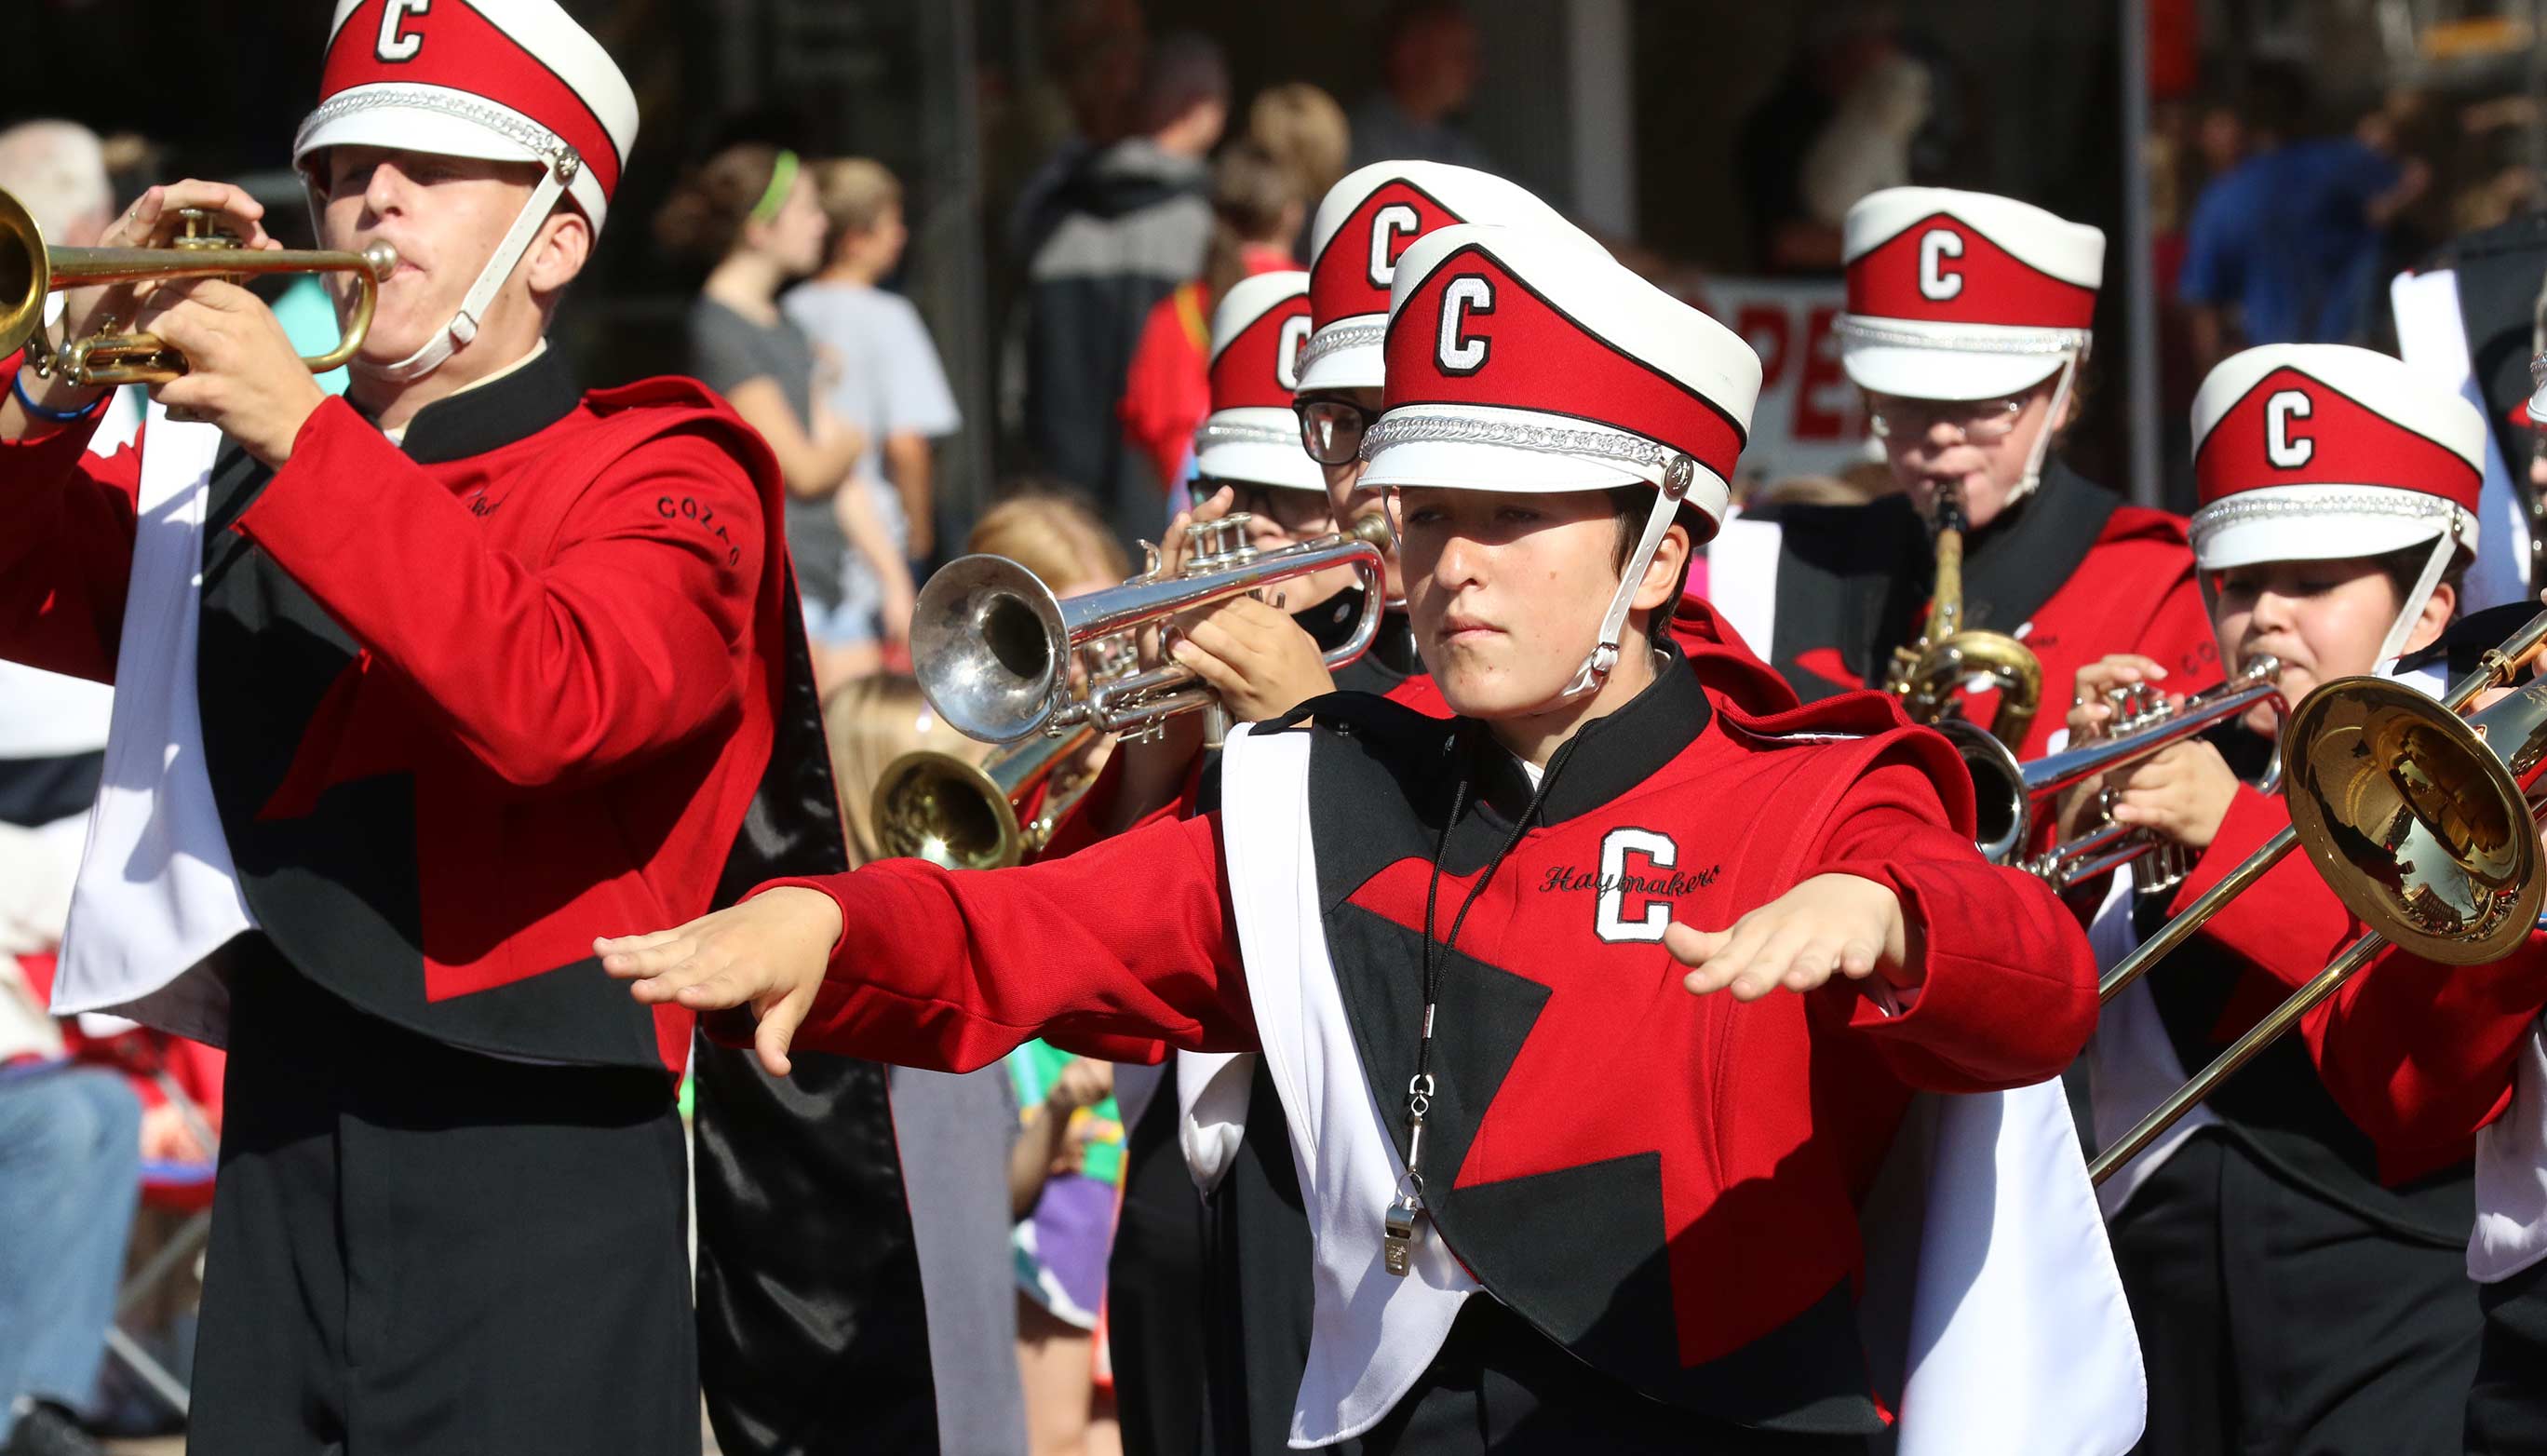 UNK Band Day parade features 24 area bands UNK News